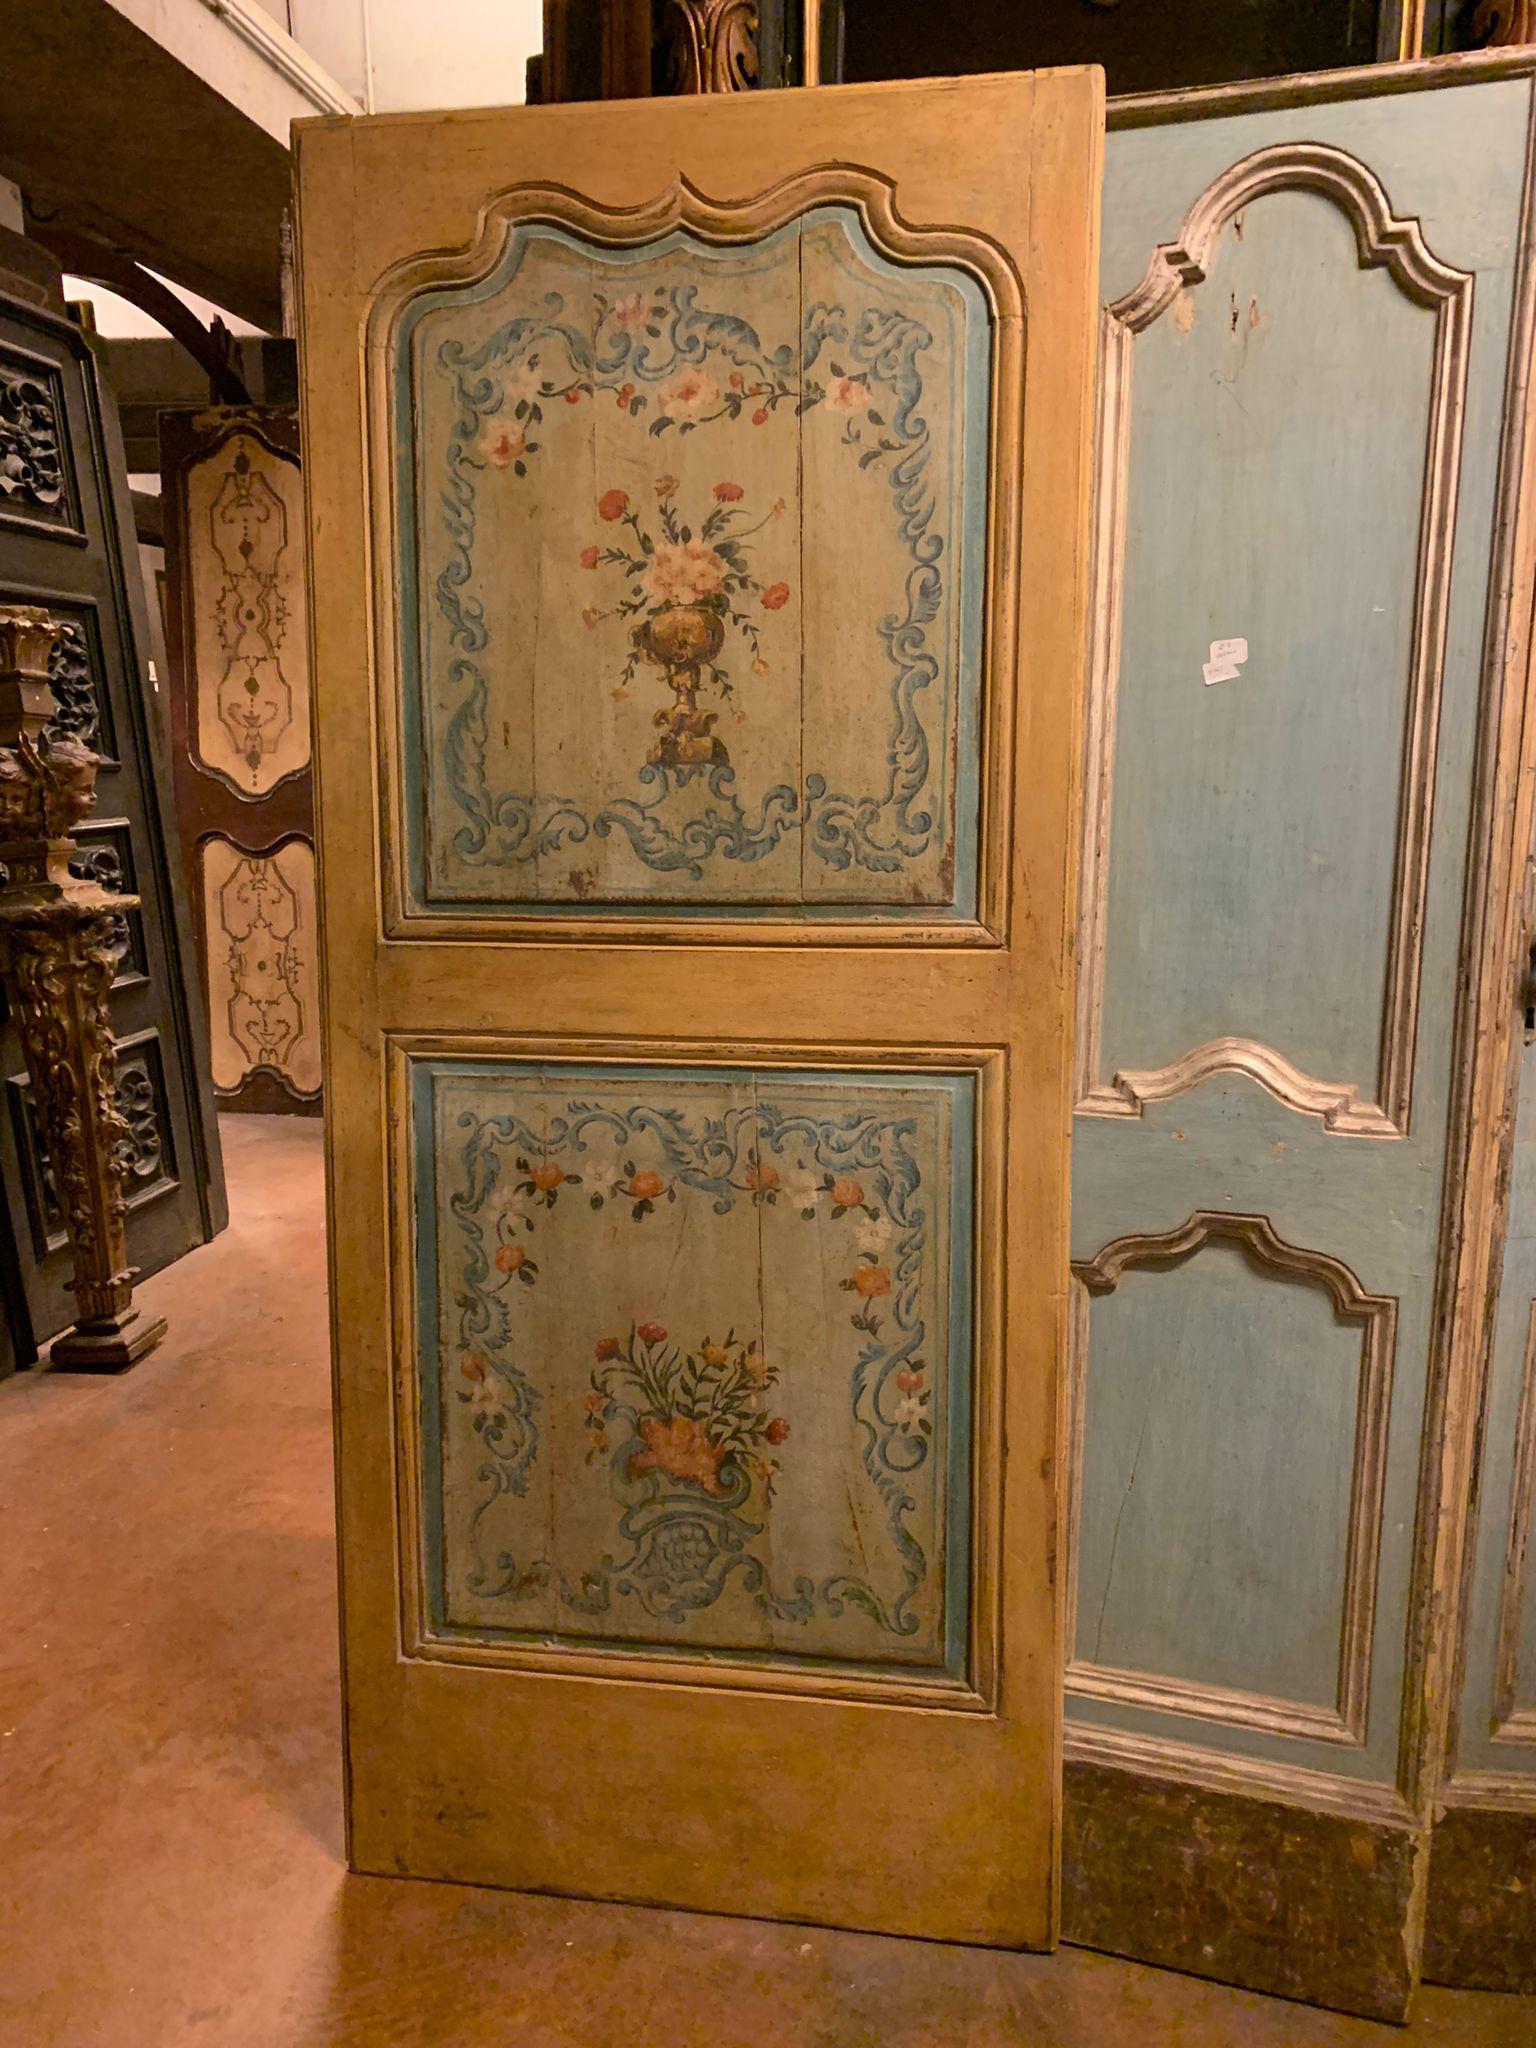 Hand-Painted Double-sided lushly painted door with floral themes, 18th century Italy